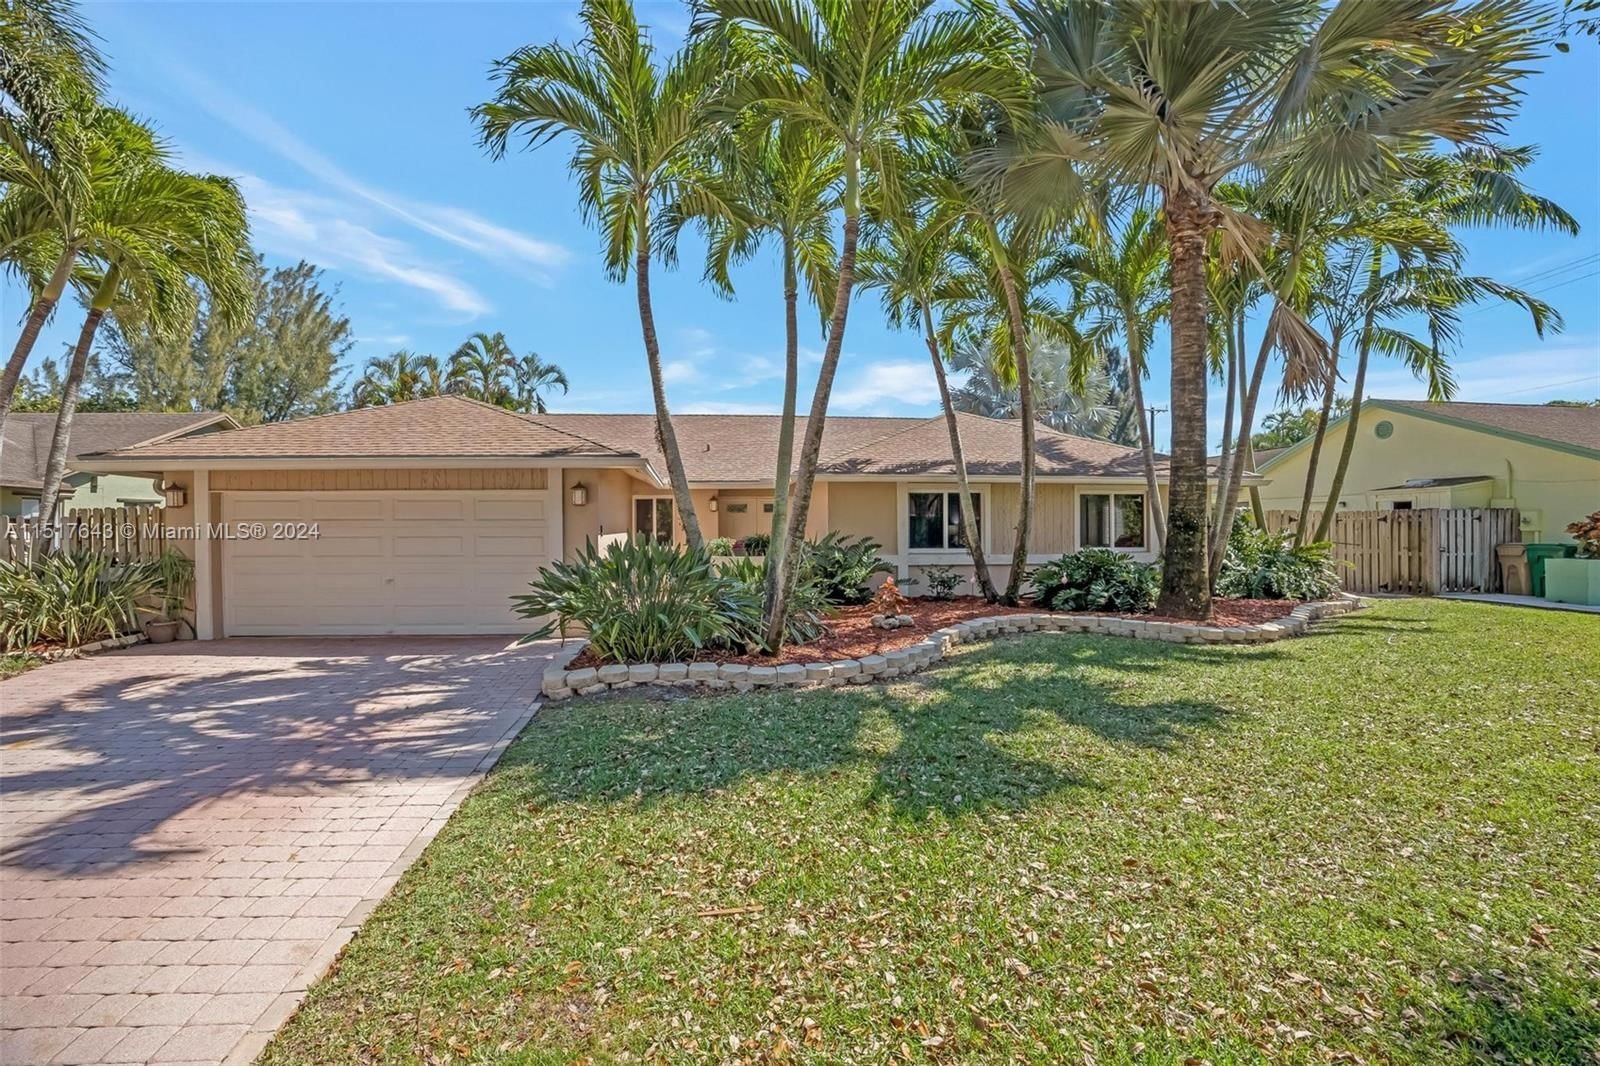 Real estate property located at 2940 81st Way, Broward County, ROLLING HILLS LAKE ESTATE, Davie, FL